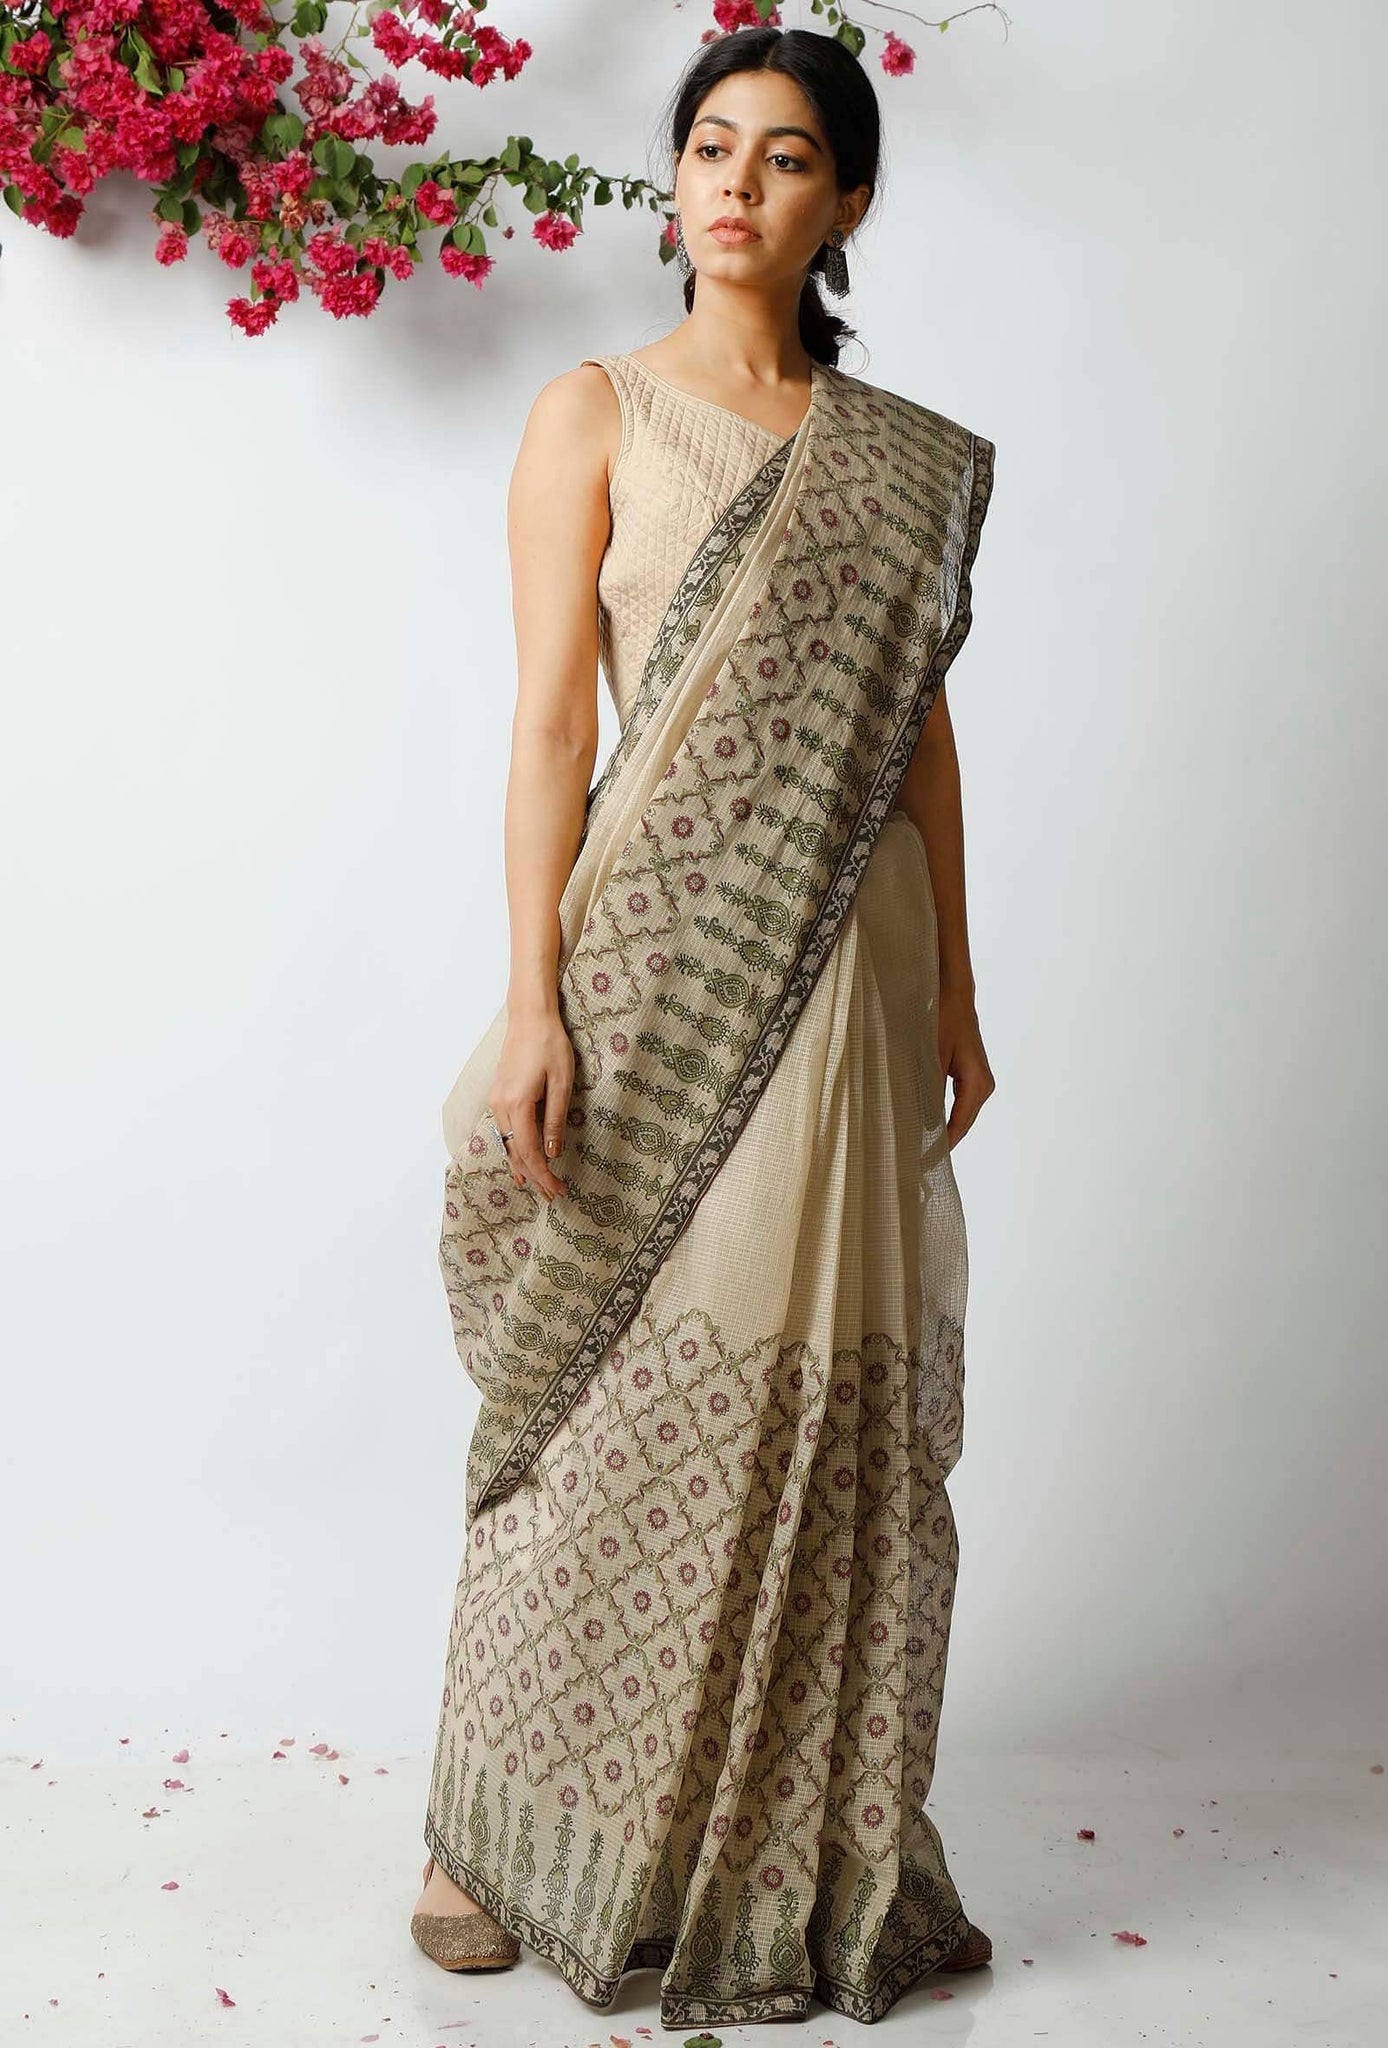 Printed Daily Wear Beige Color, Pure Linen Saree